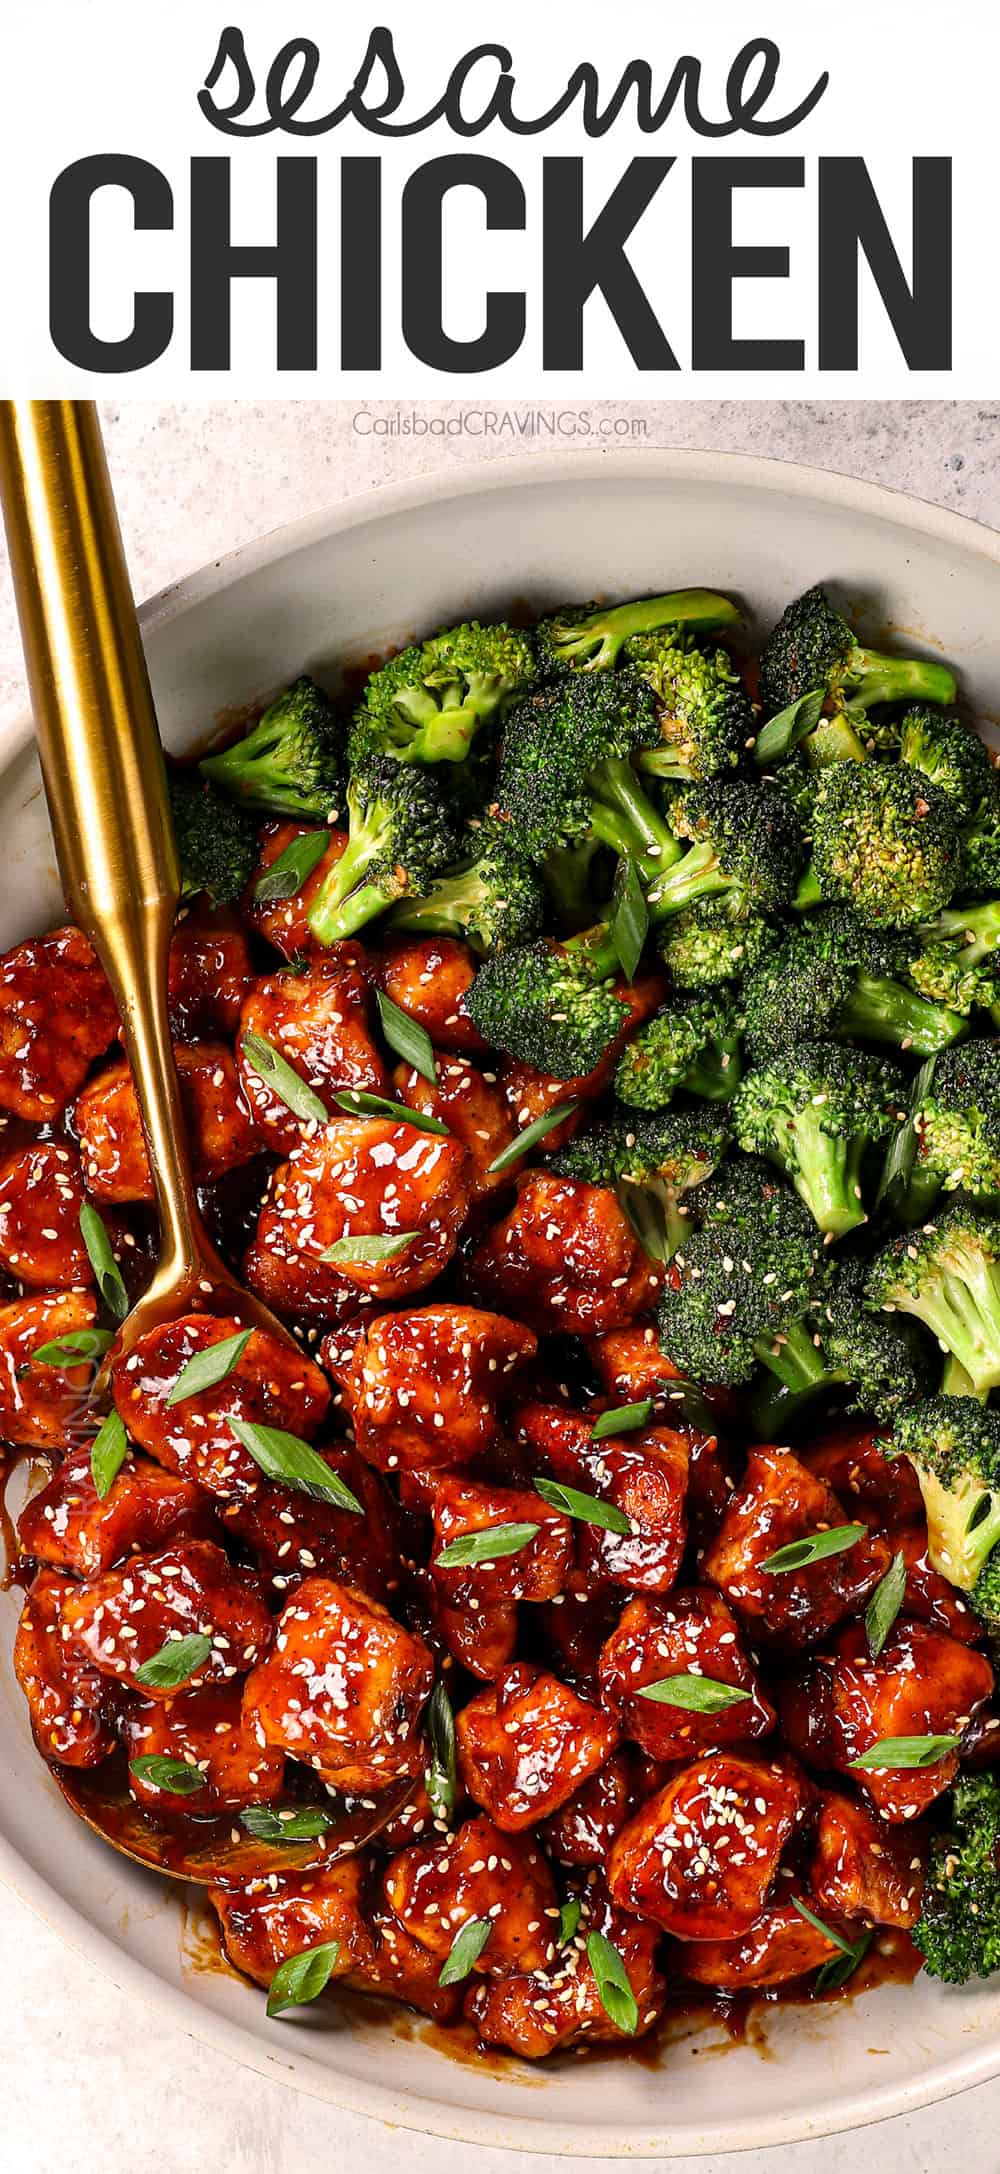 top view of sesame chicken recipe in a skillet with stir fried broccoli